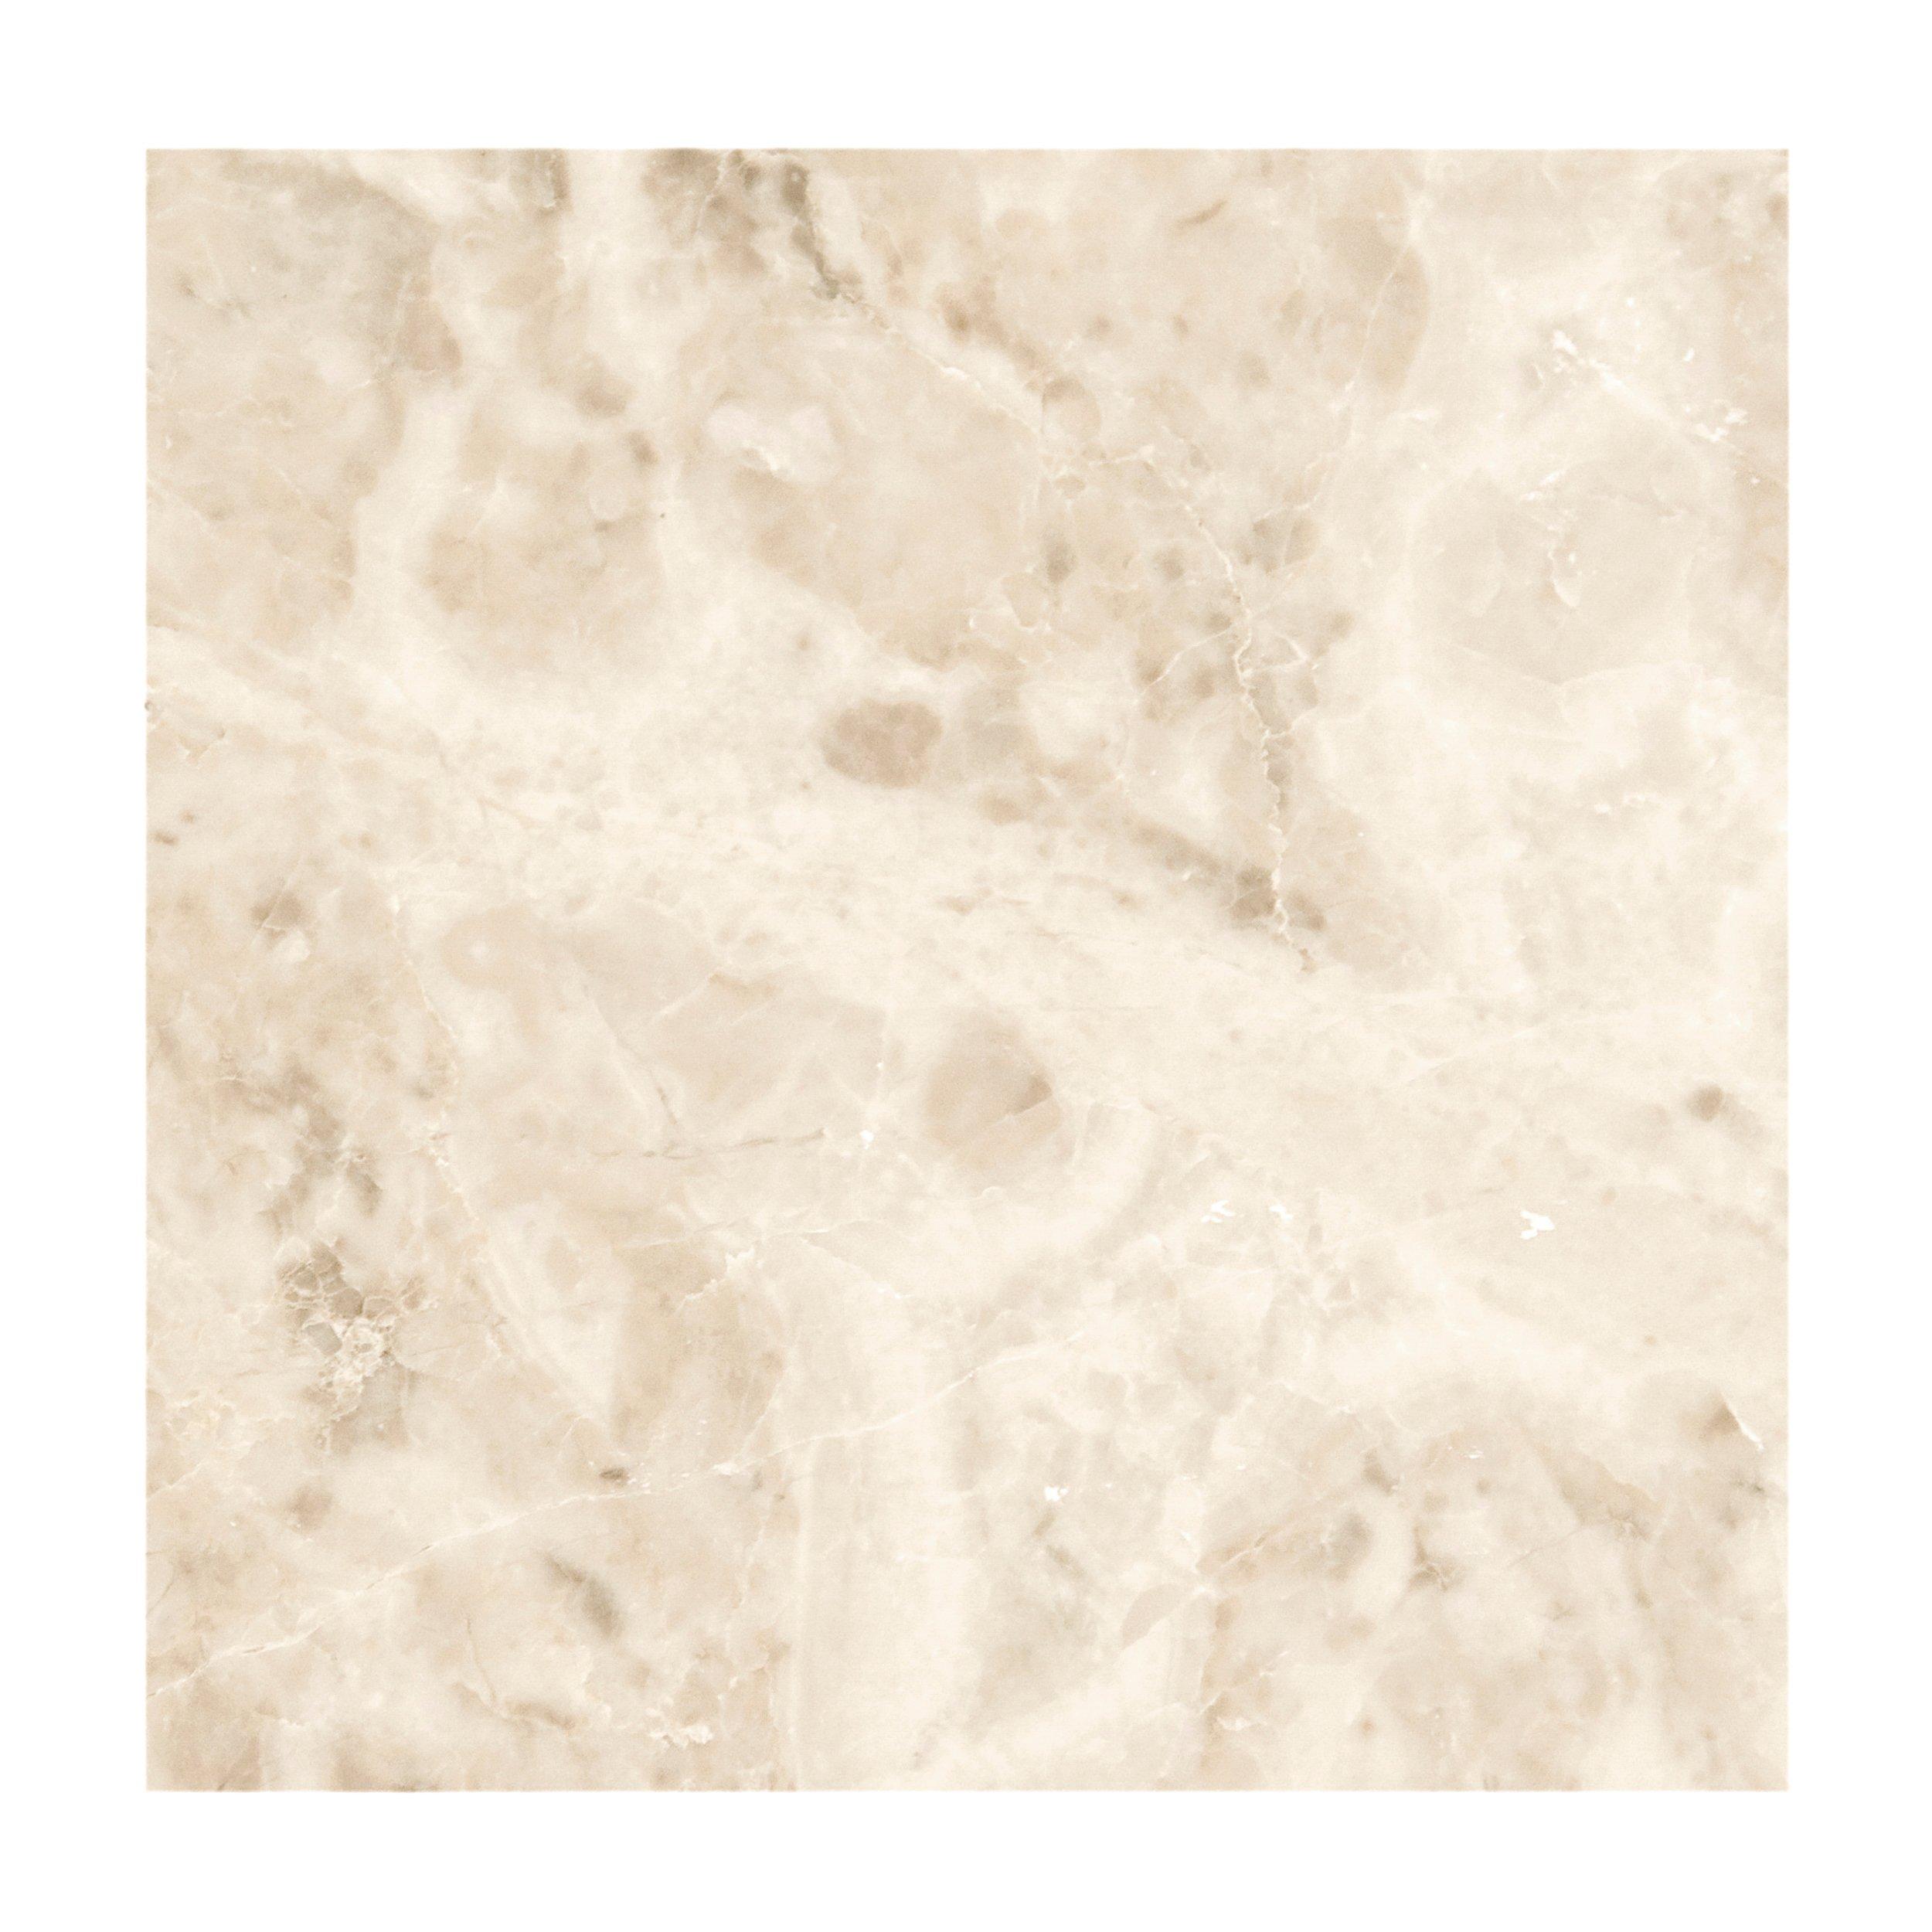 Cappuccino Beige Polished Marble Tile